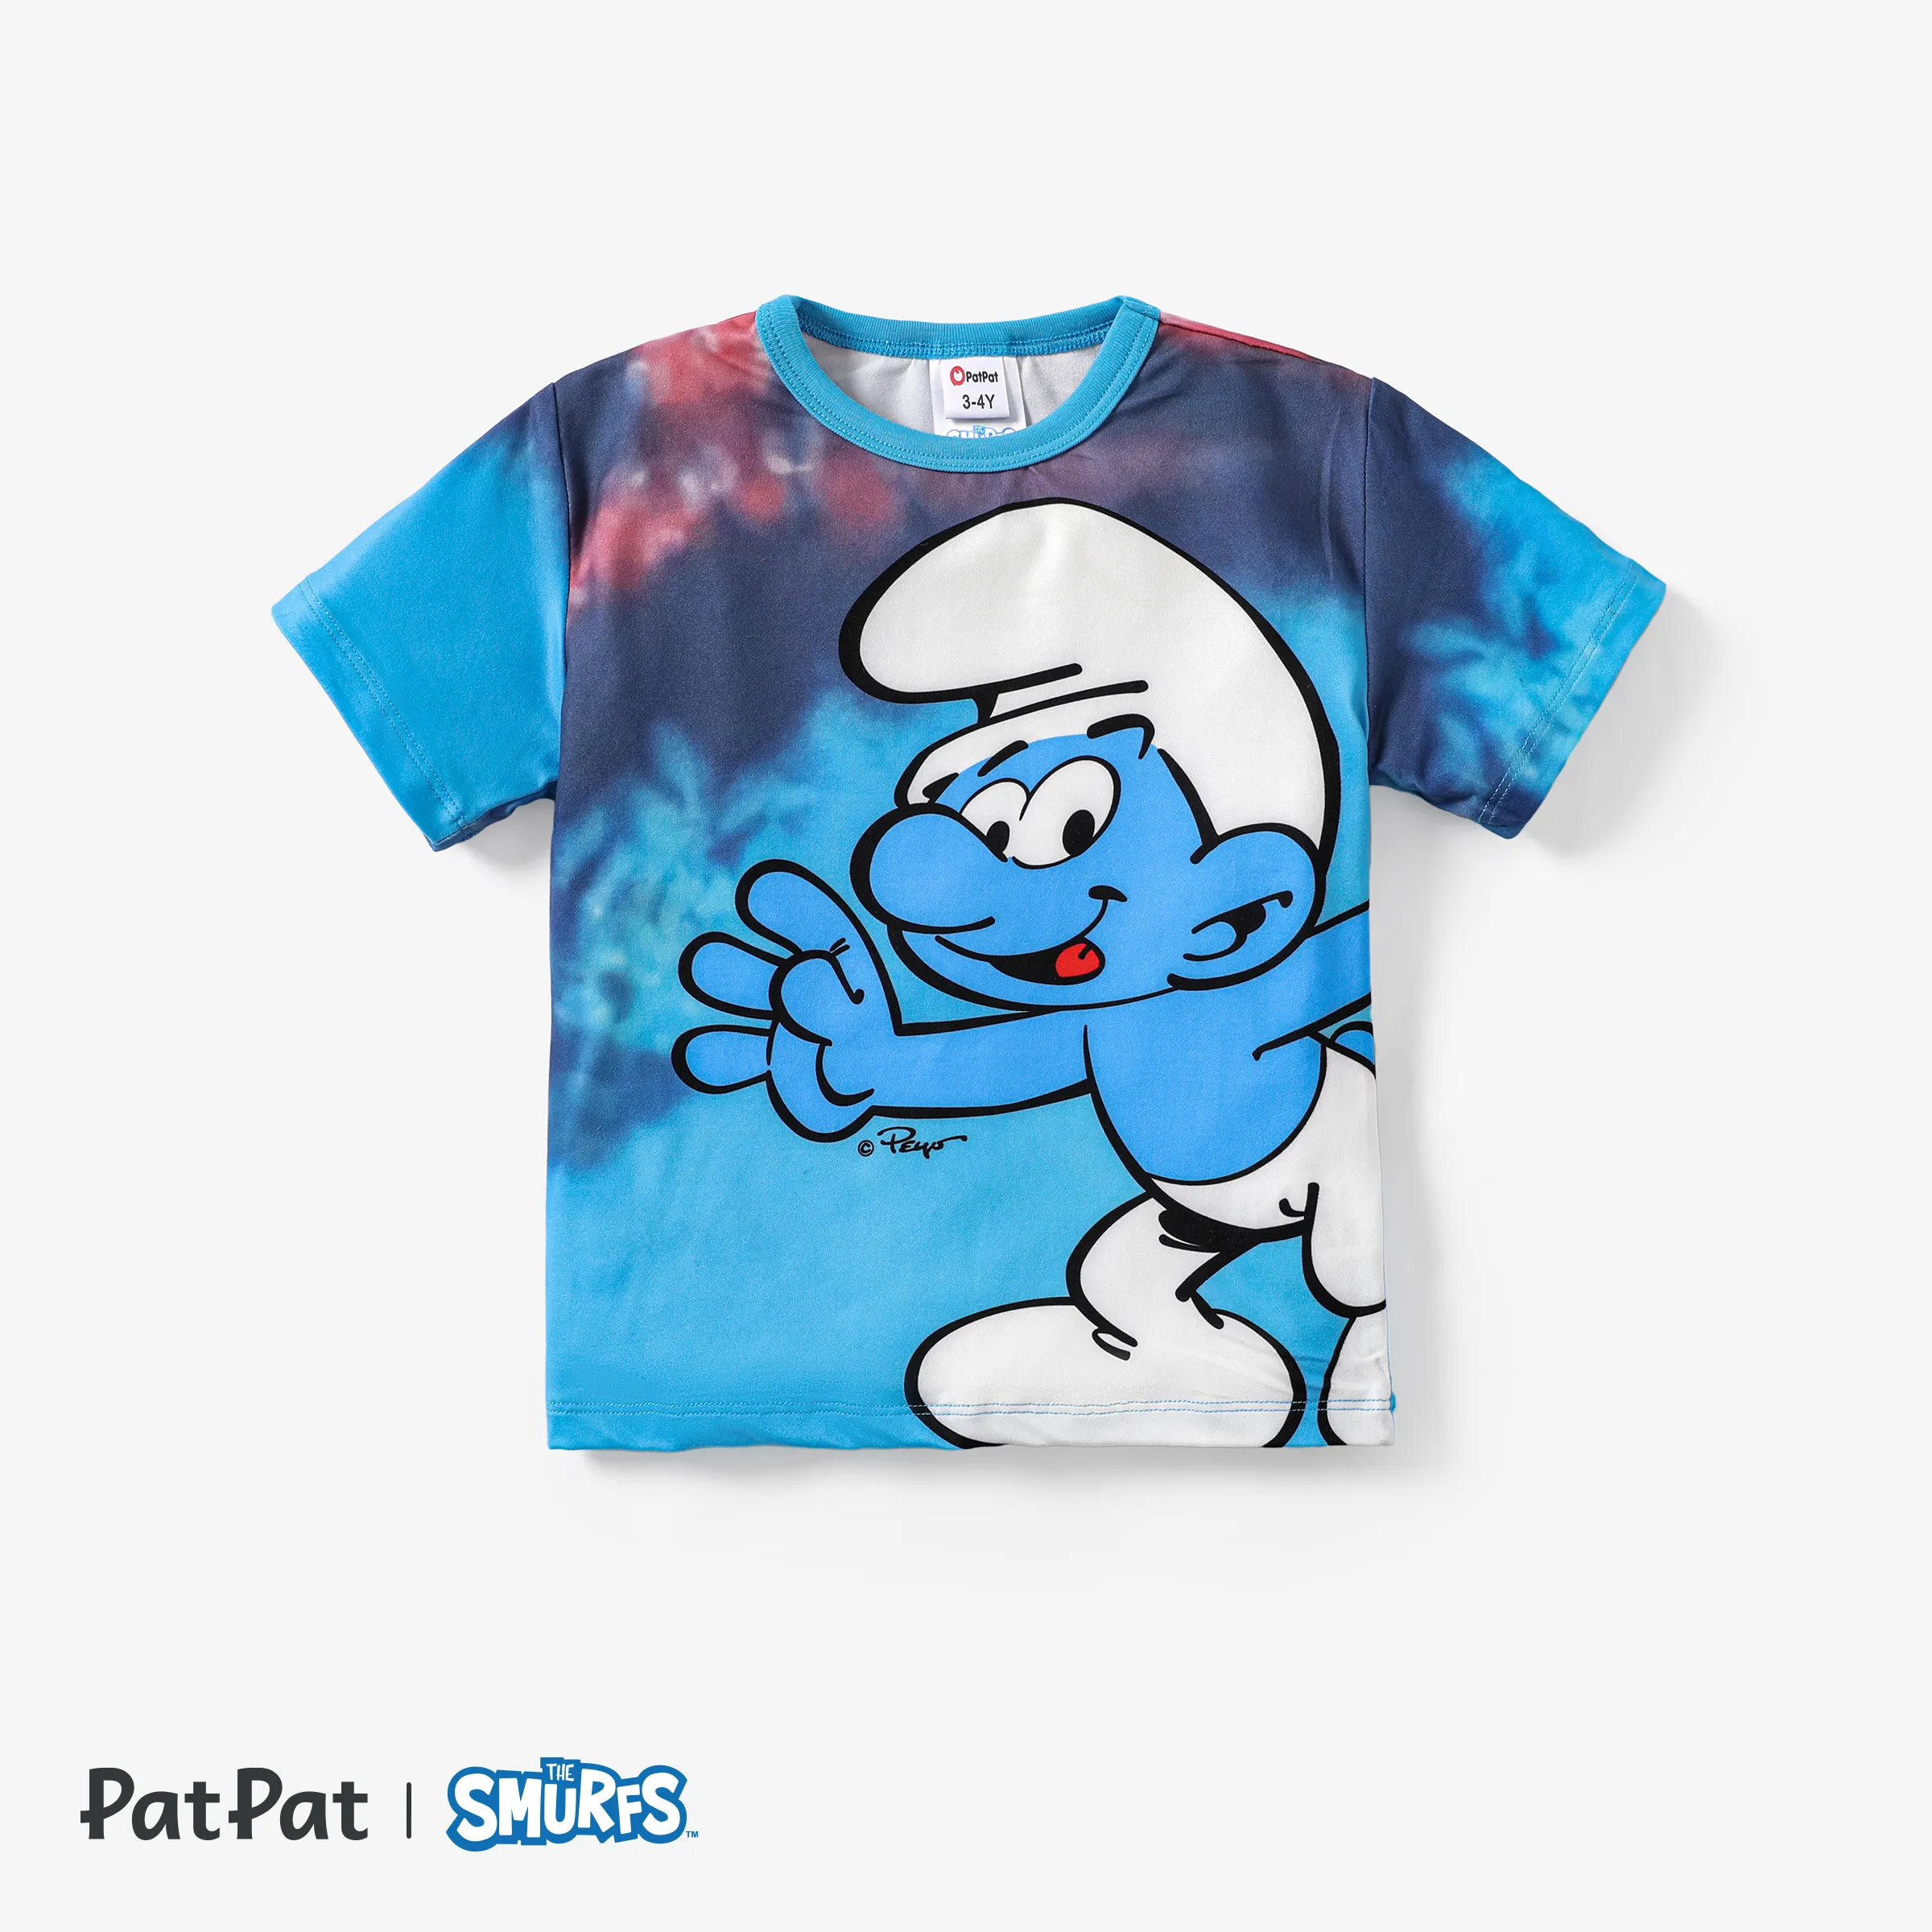 Smurfs Big Graphic Family Matching Tops and Romper